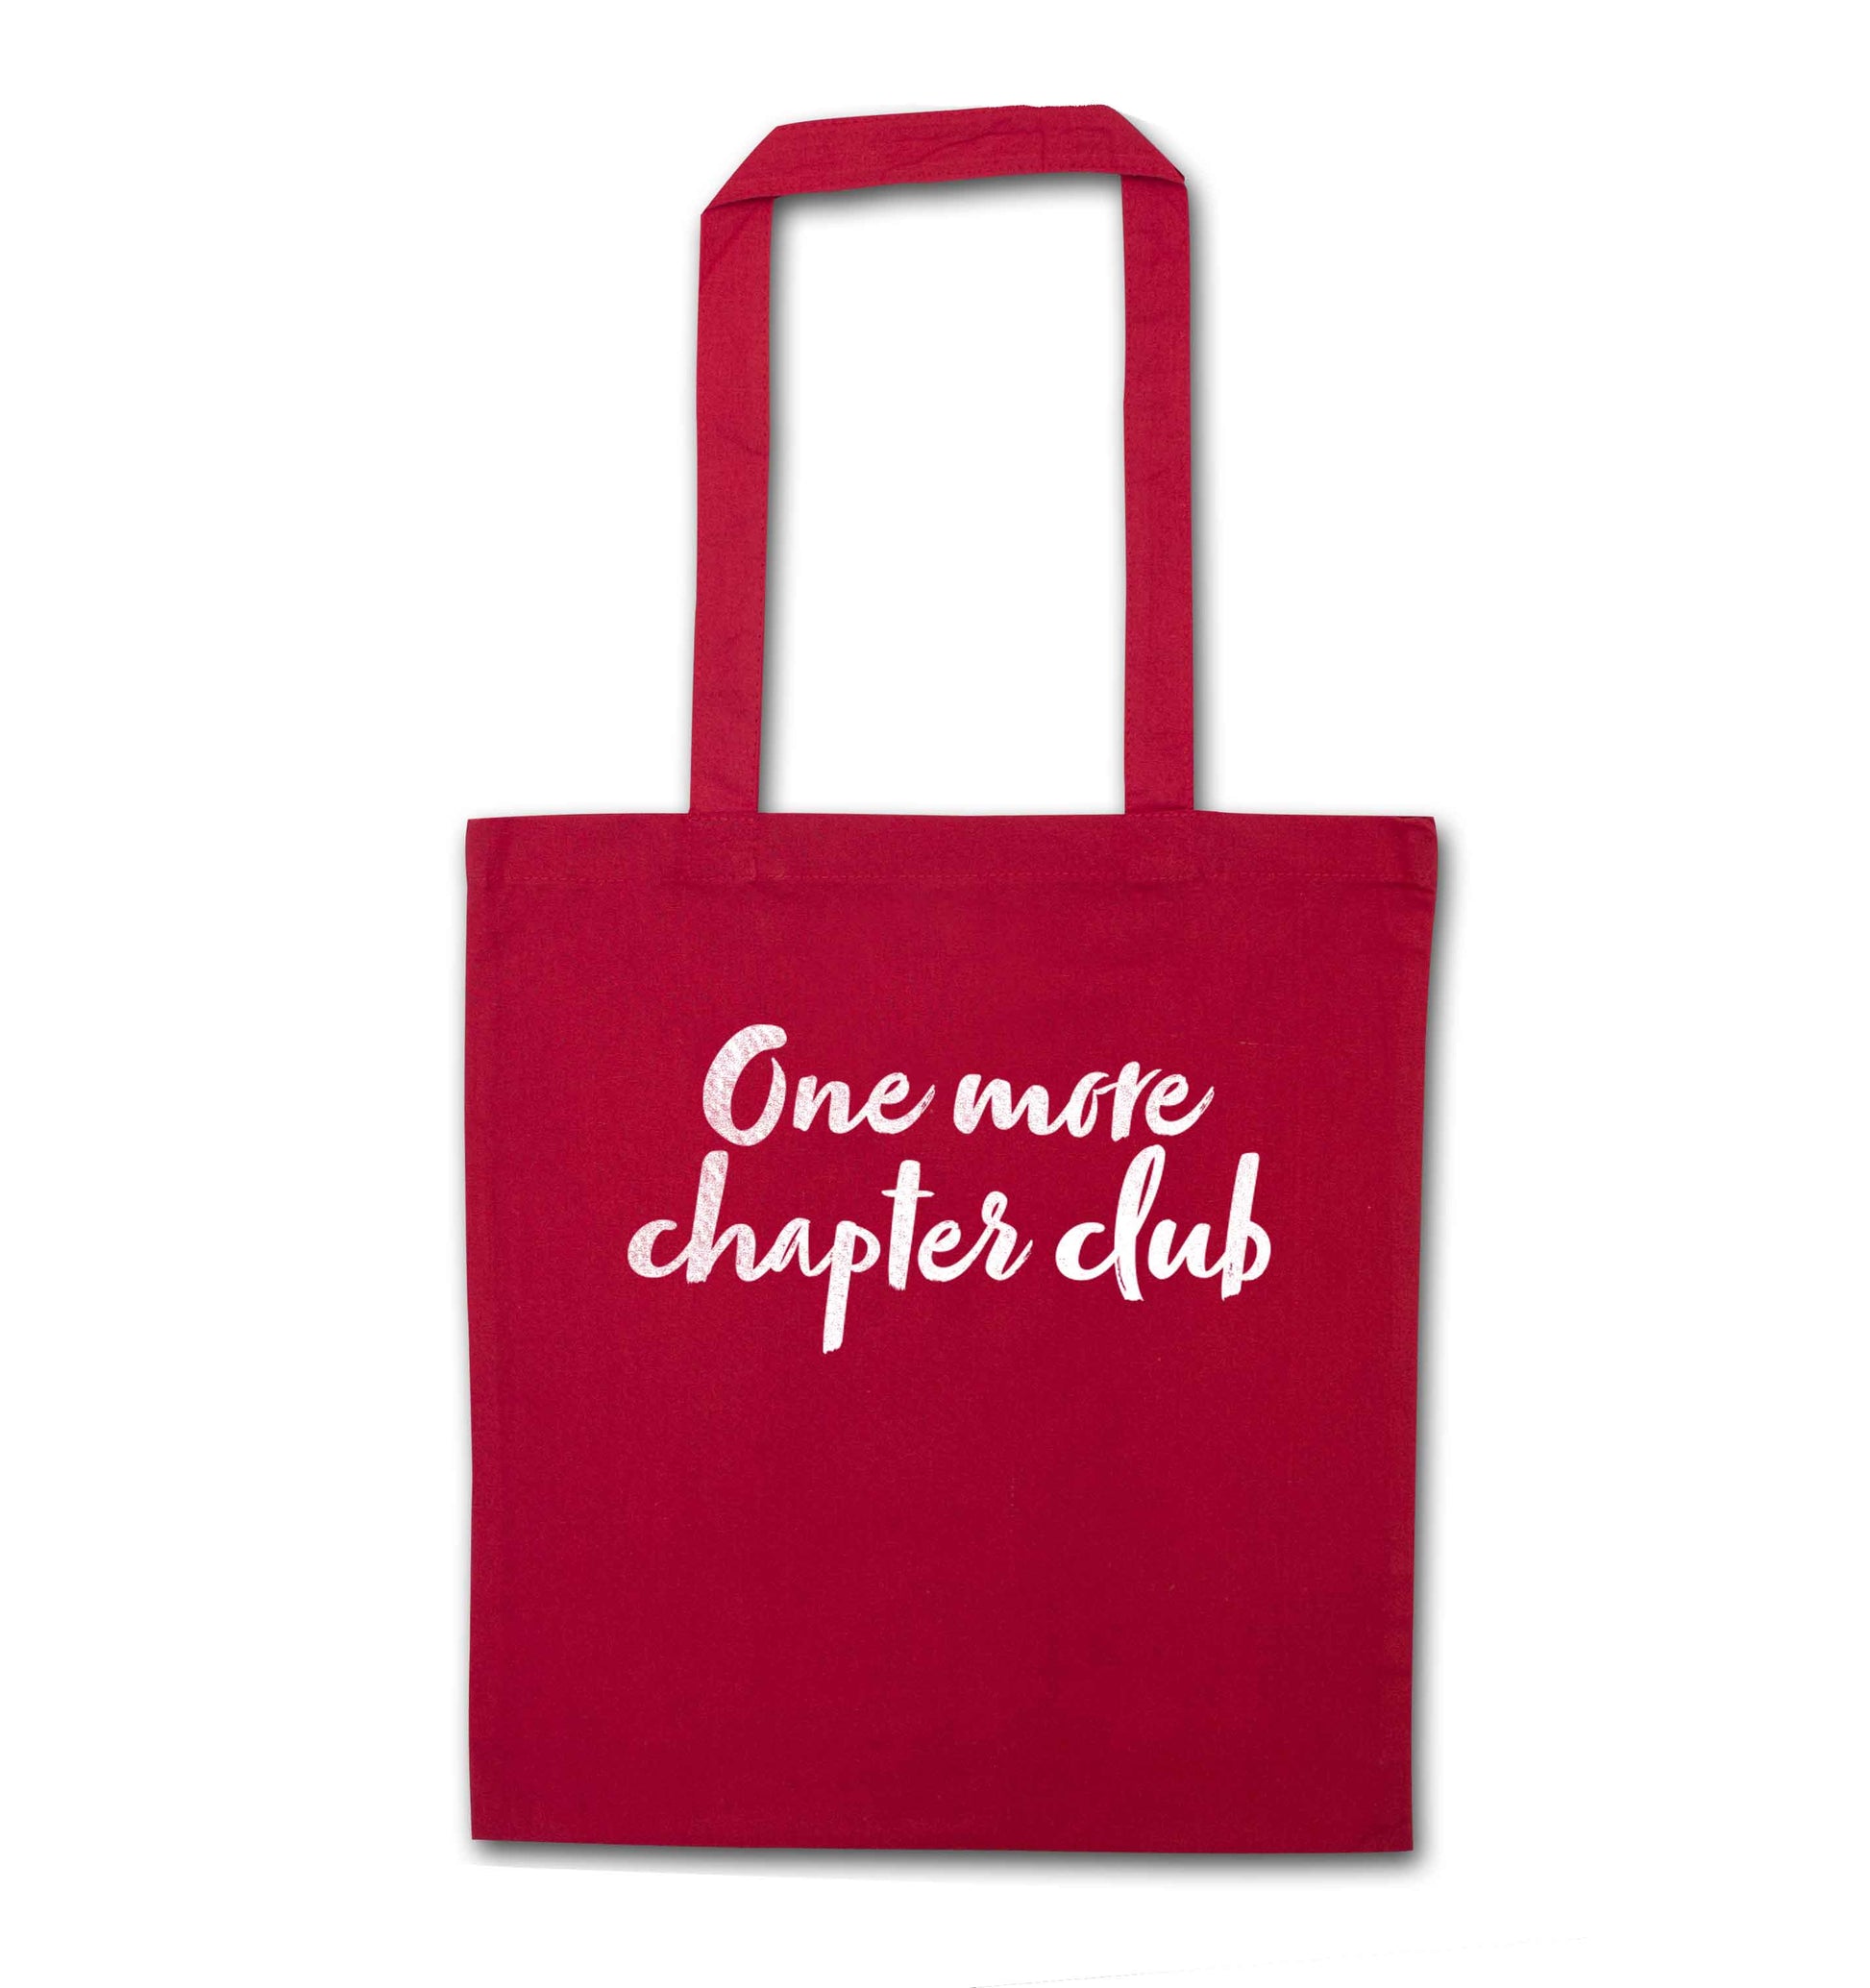 One more chapter club Kit red tote bag